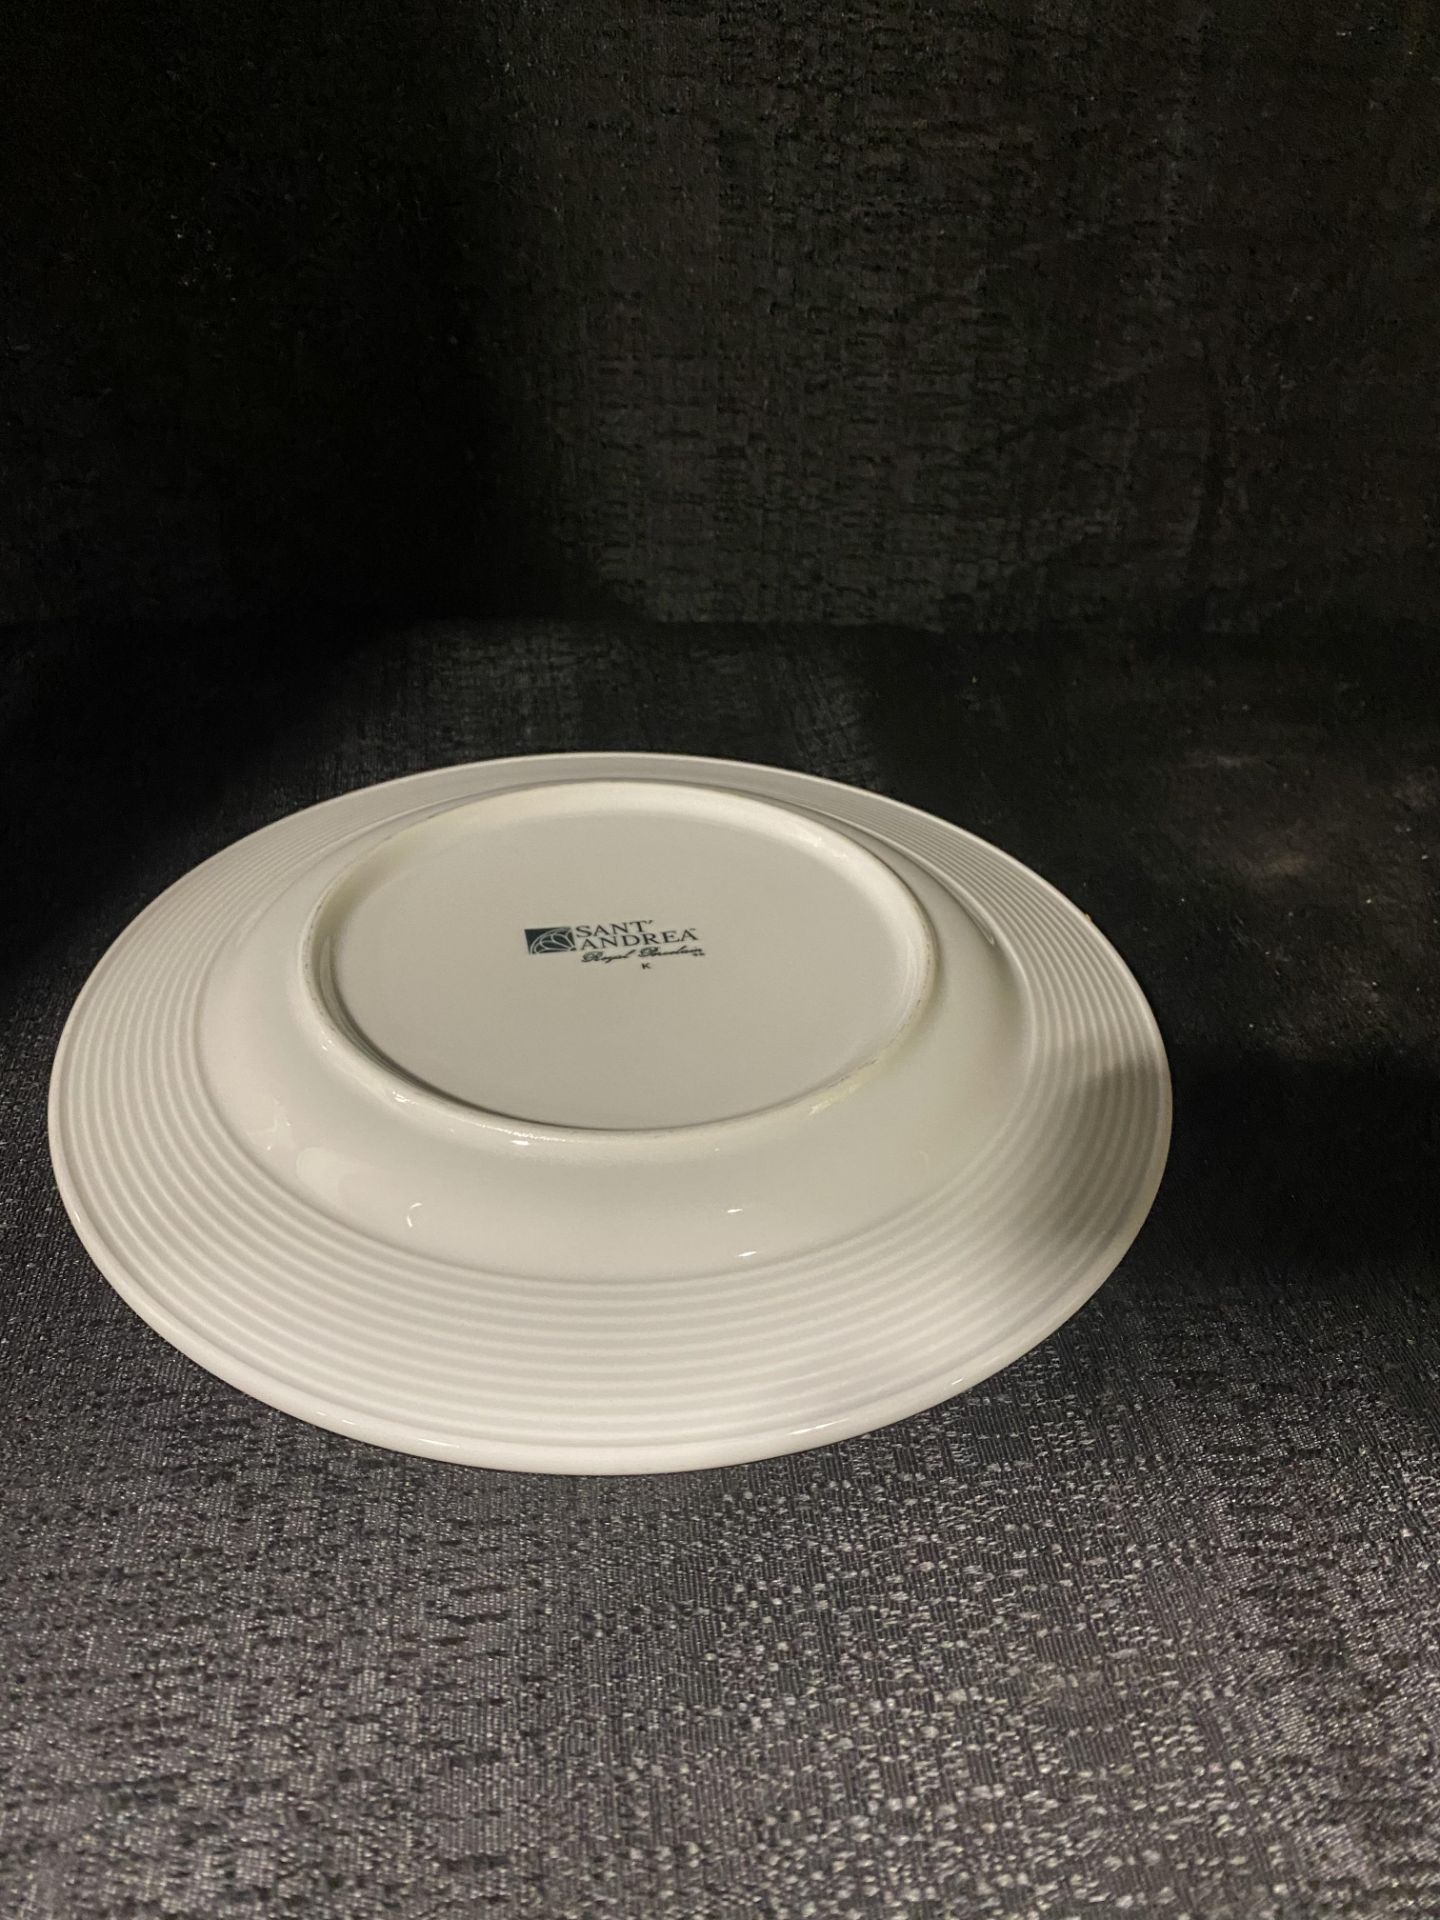 (50) 9.5" Salad/Dessert Plates White China Sant Andrea (BRING PACKING MATERIAL) - Image 2 of 2